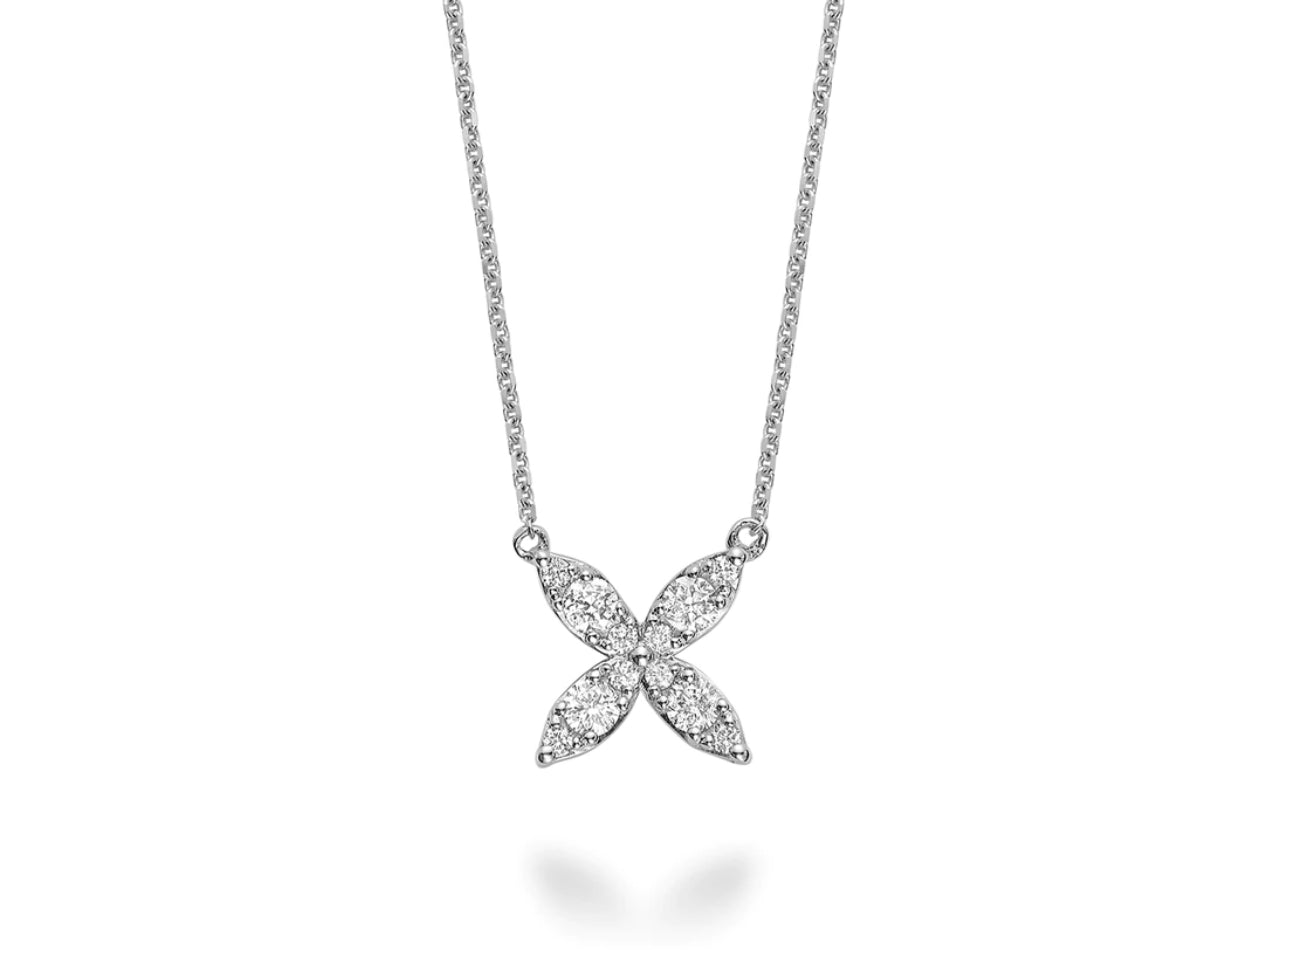 A diamond flower necklace made of 14kt white gold. The necklace is accented with a total weight of 0.20cts of diamonds and features a delicate flower pendant with a sparkling cluster of diamonds in the center.